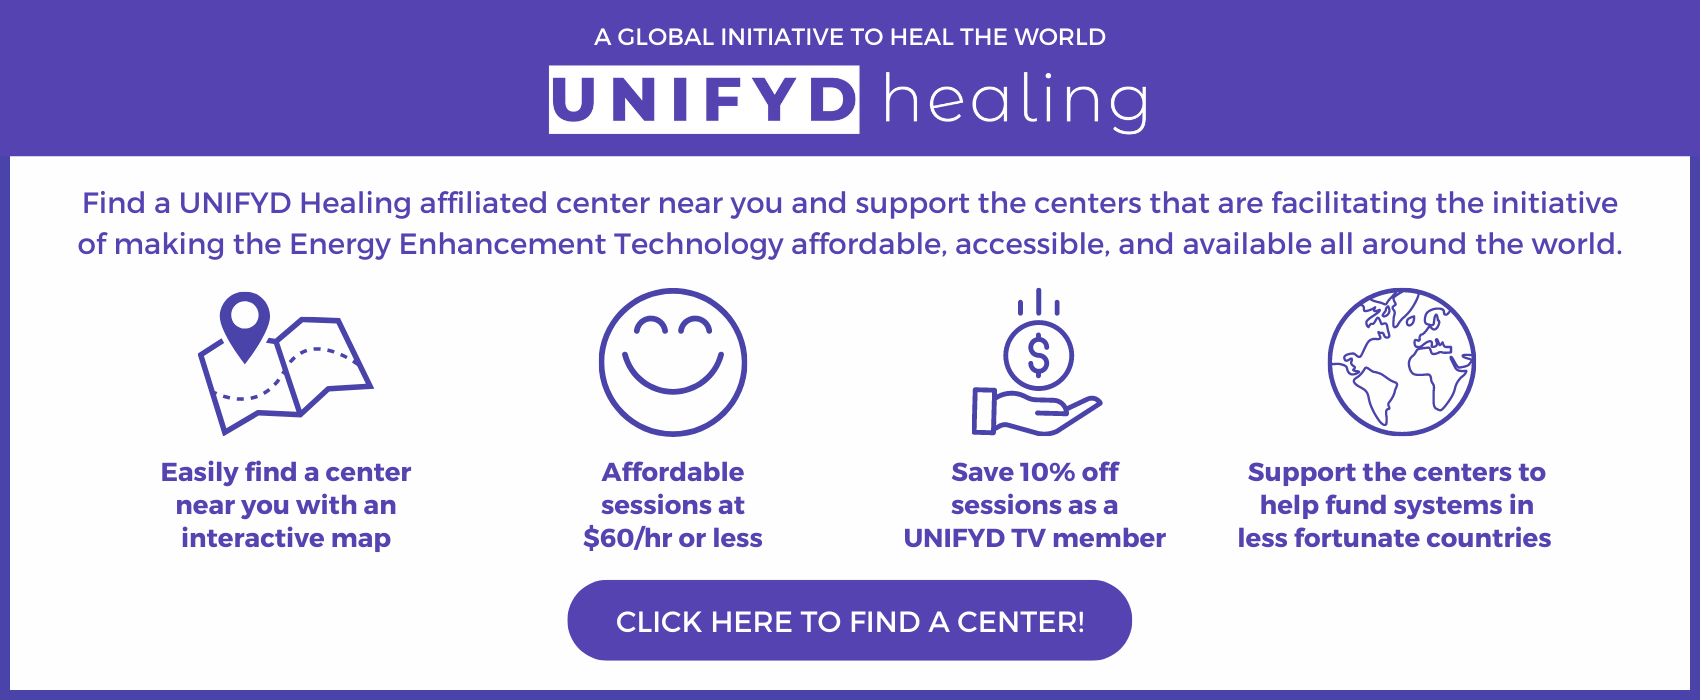 Find a UNIFYD Healing affiliated center near you